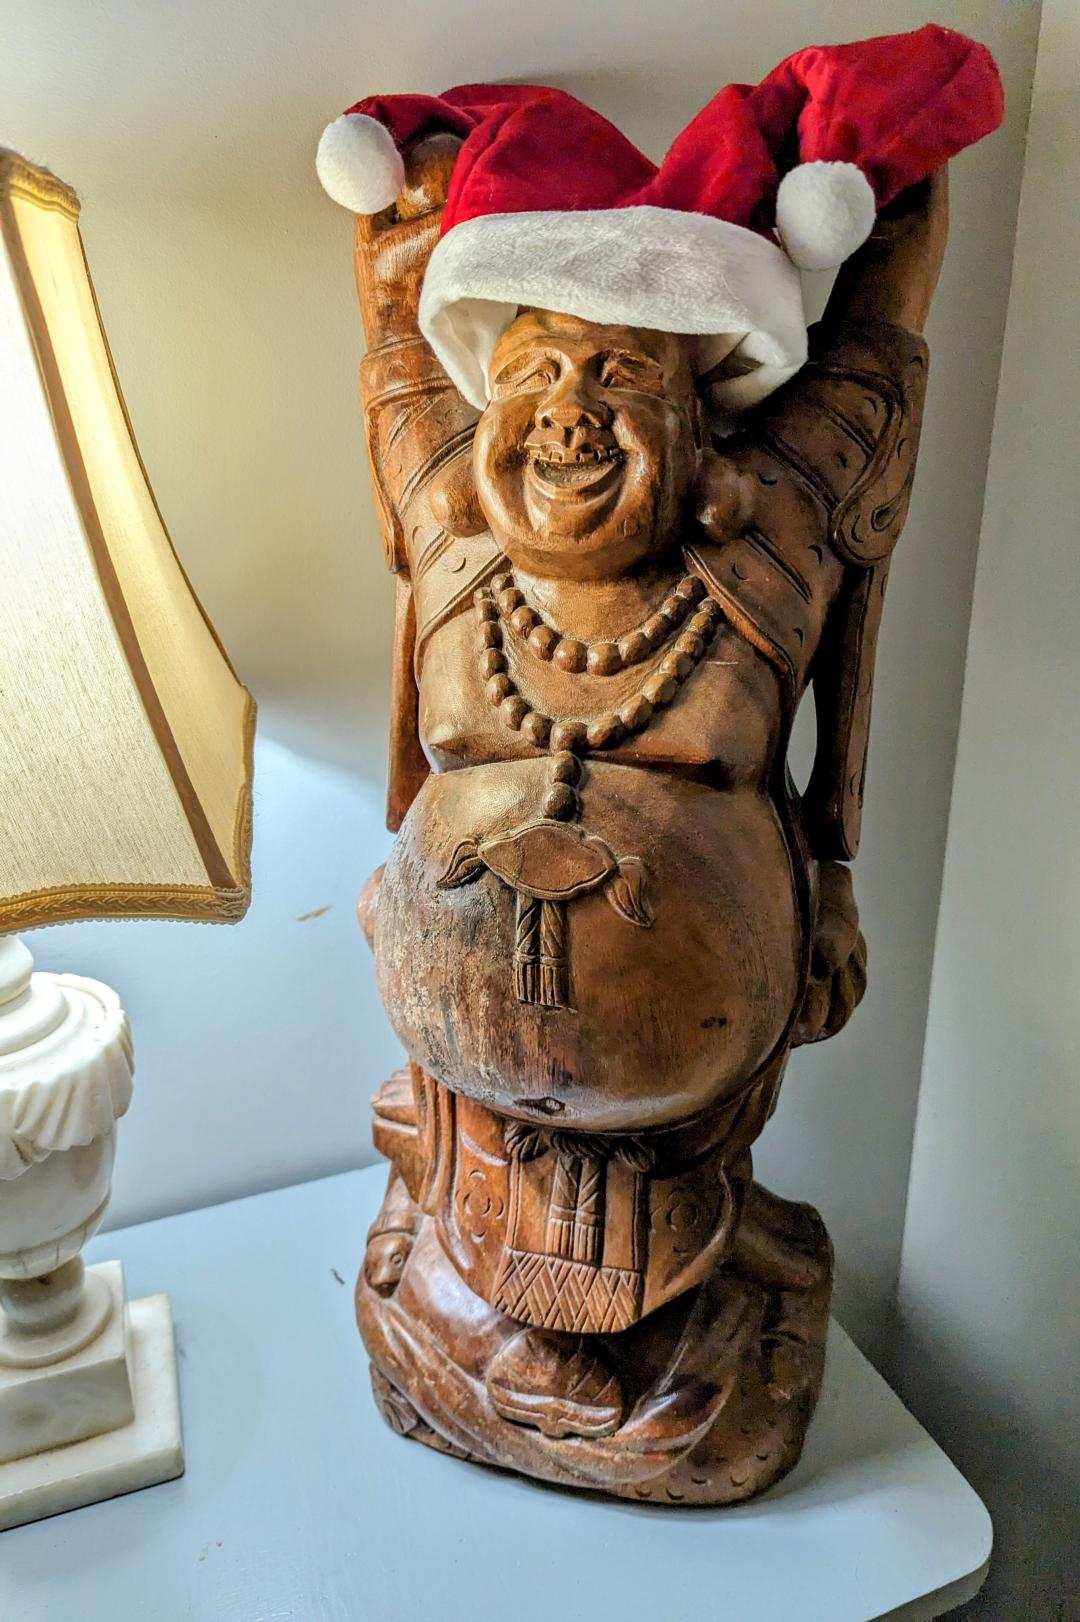 A carved wooden statue of Buddha with a Santa Clause hat placed on Buddha's head